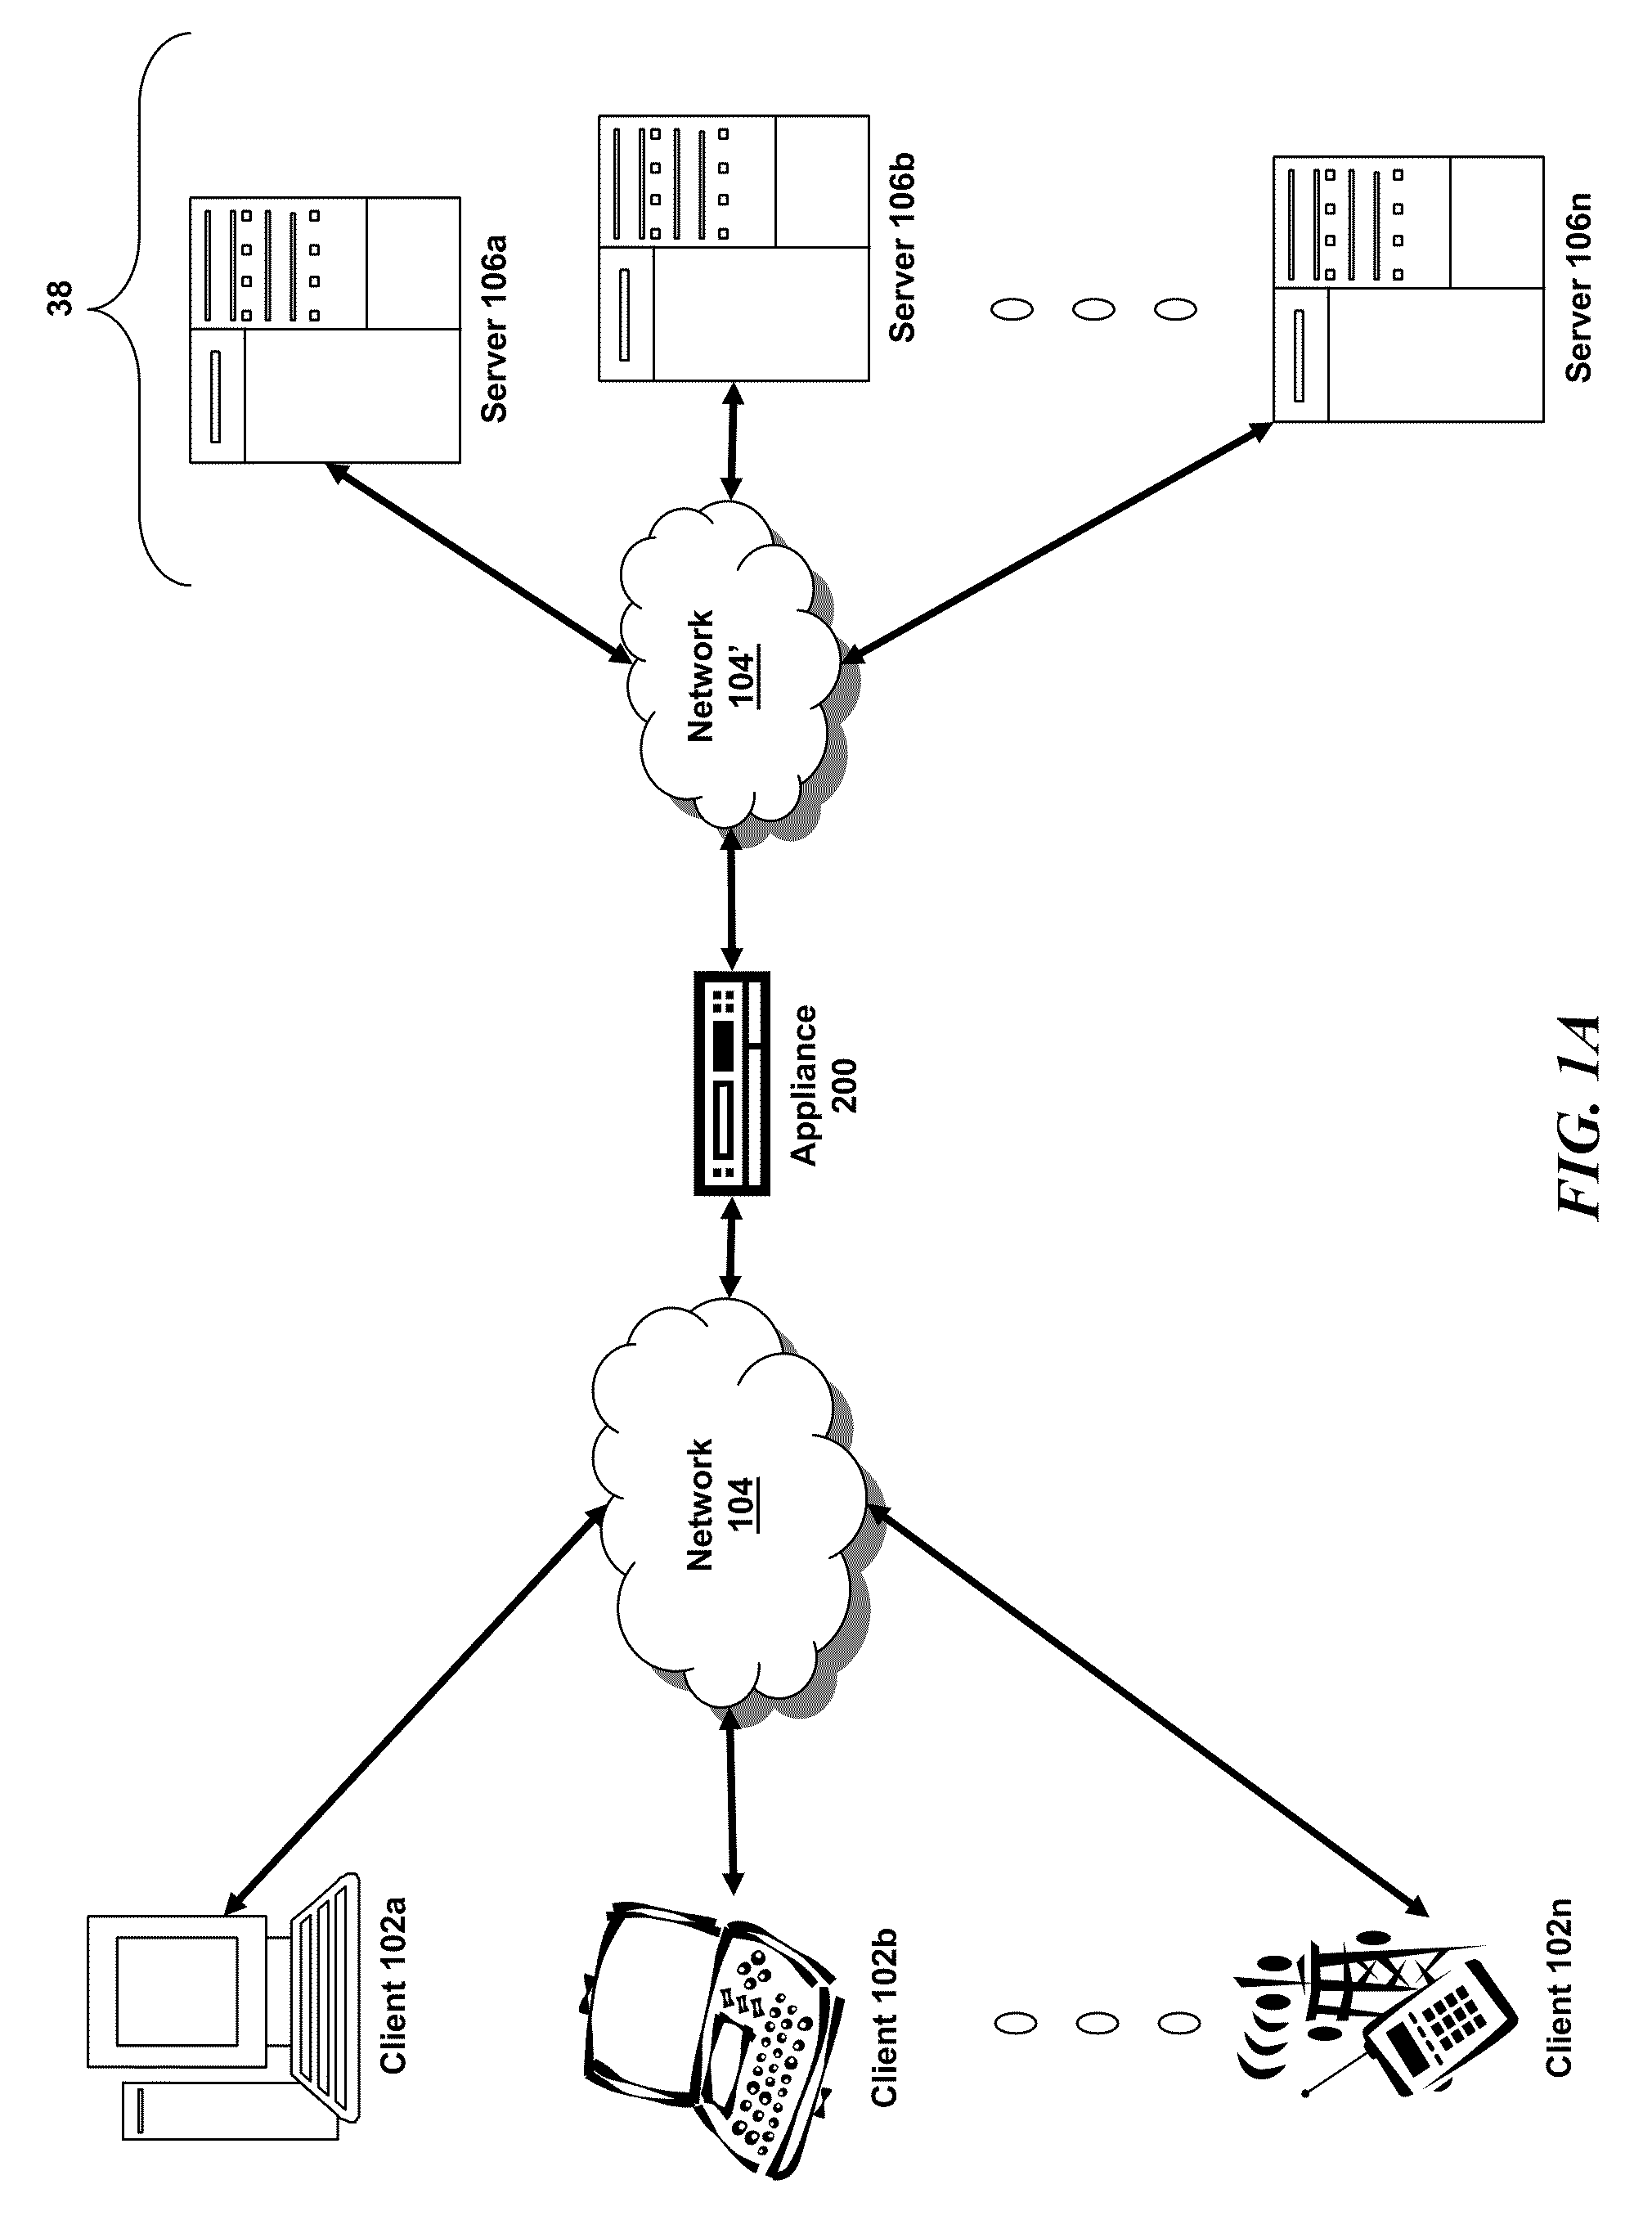 Systems and methods for web logging of trace data in a multi-core system